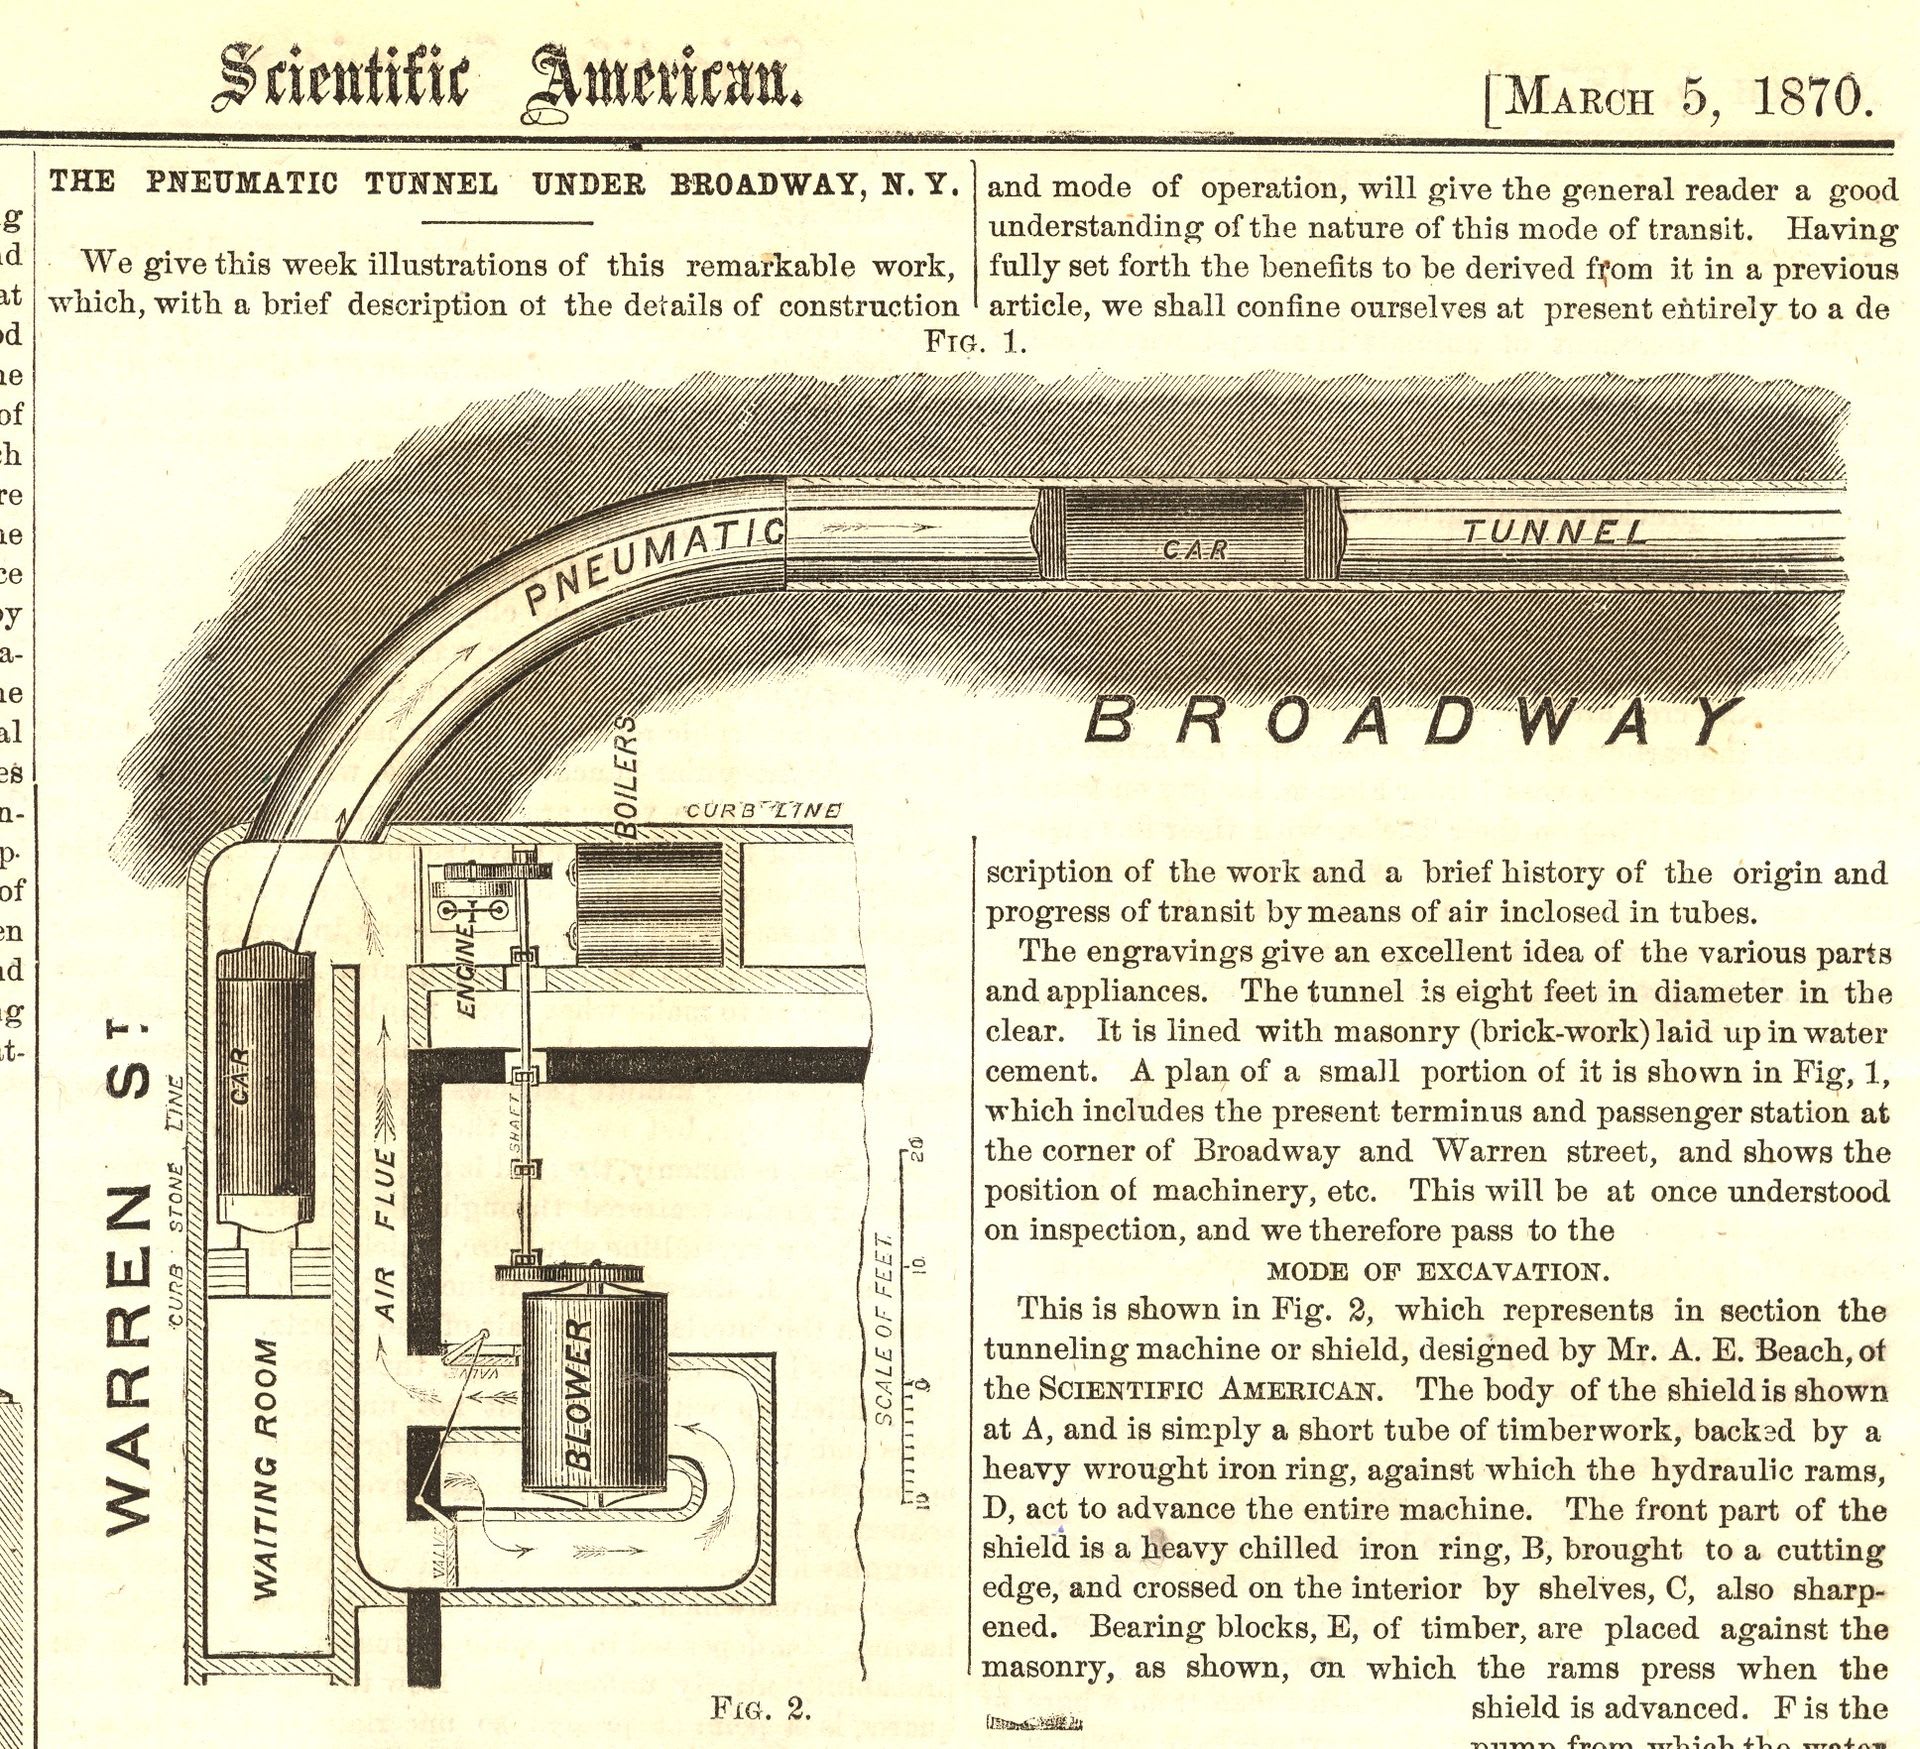 The plan of the Beach Pneumatic Transit station and tunnel.